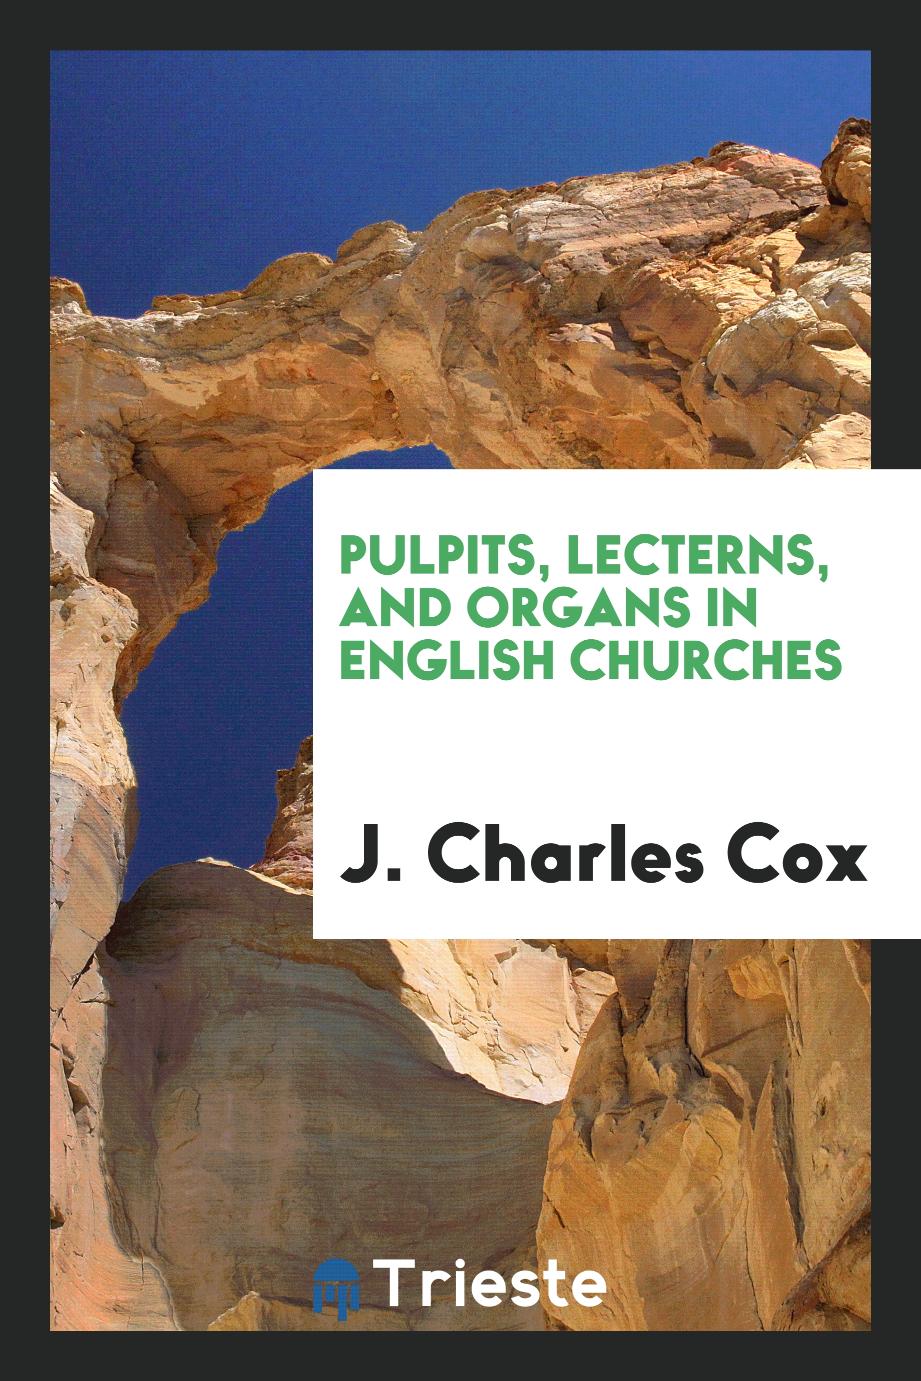 J. Charles Cox - Pulpits, lecterns, and organs in English churches